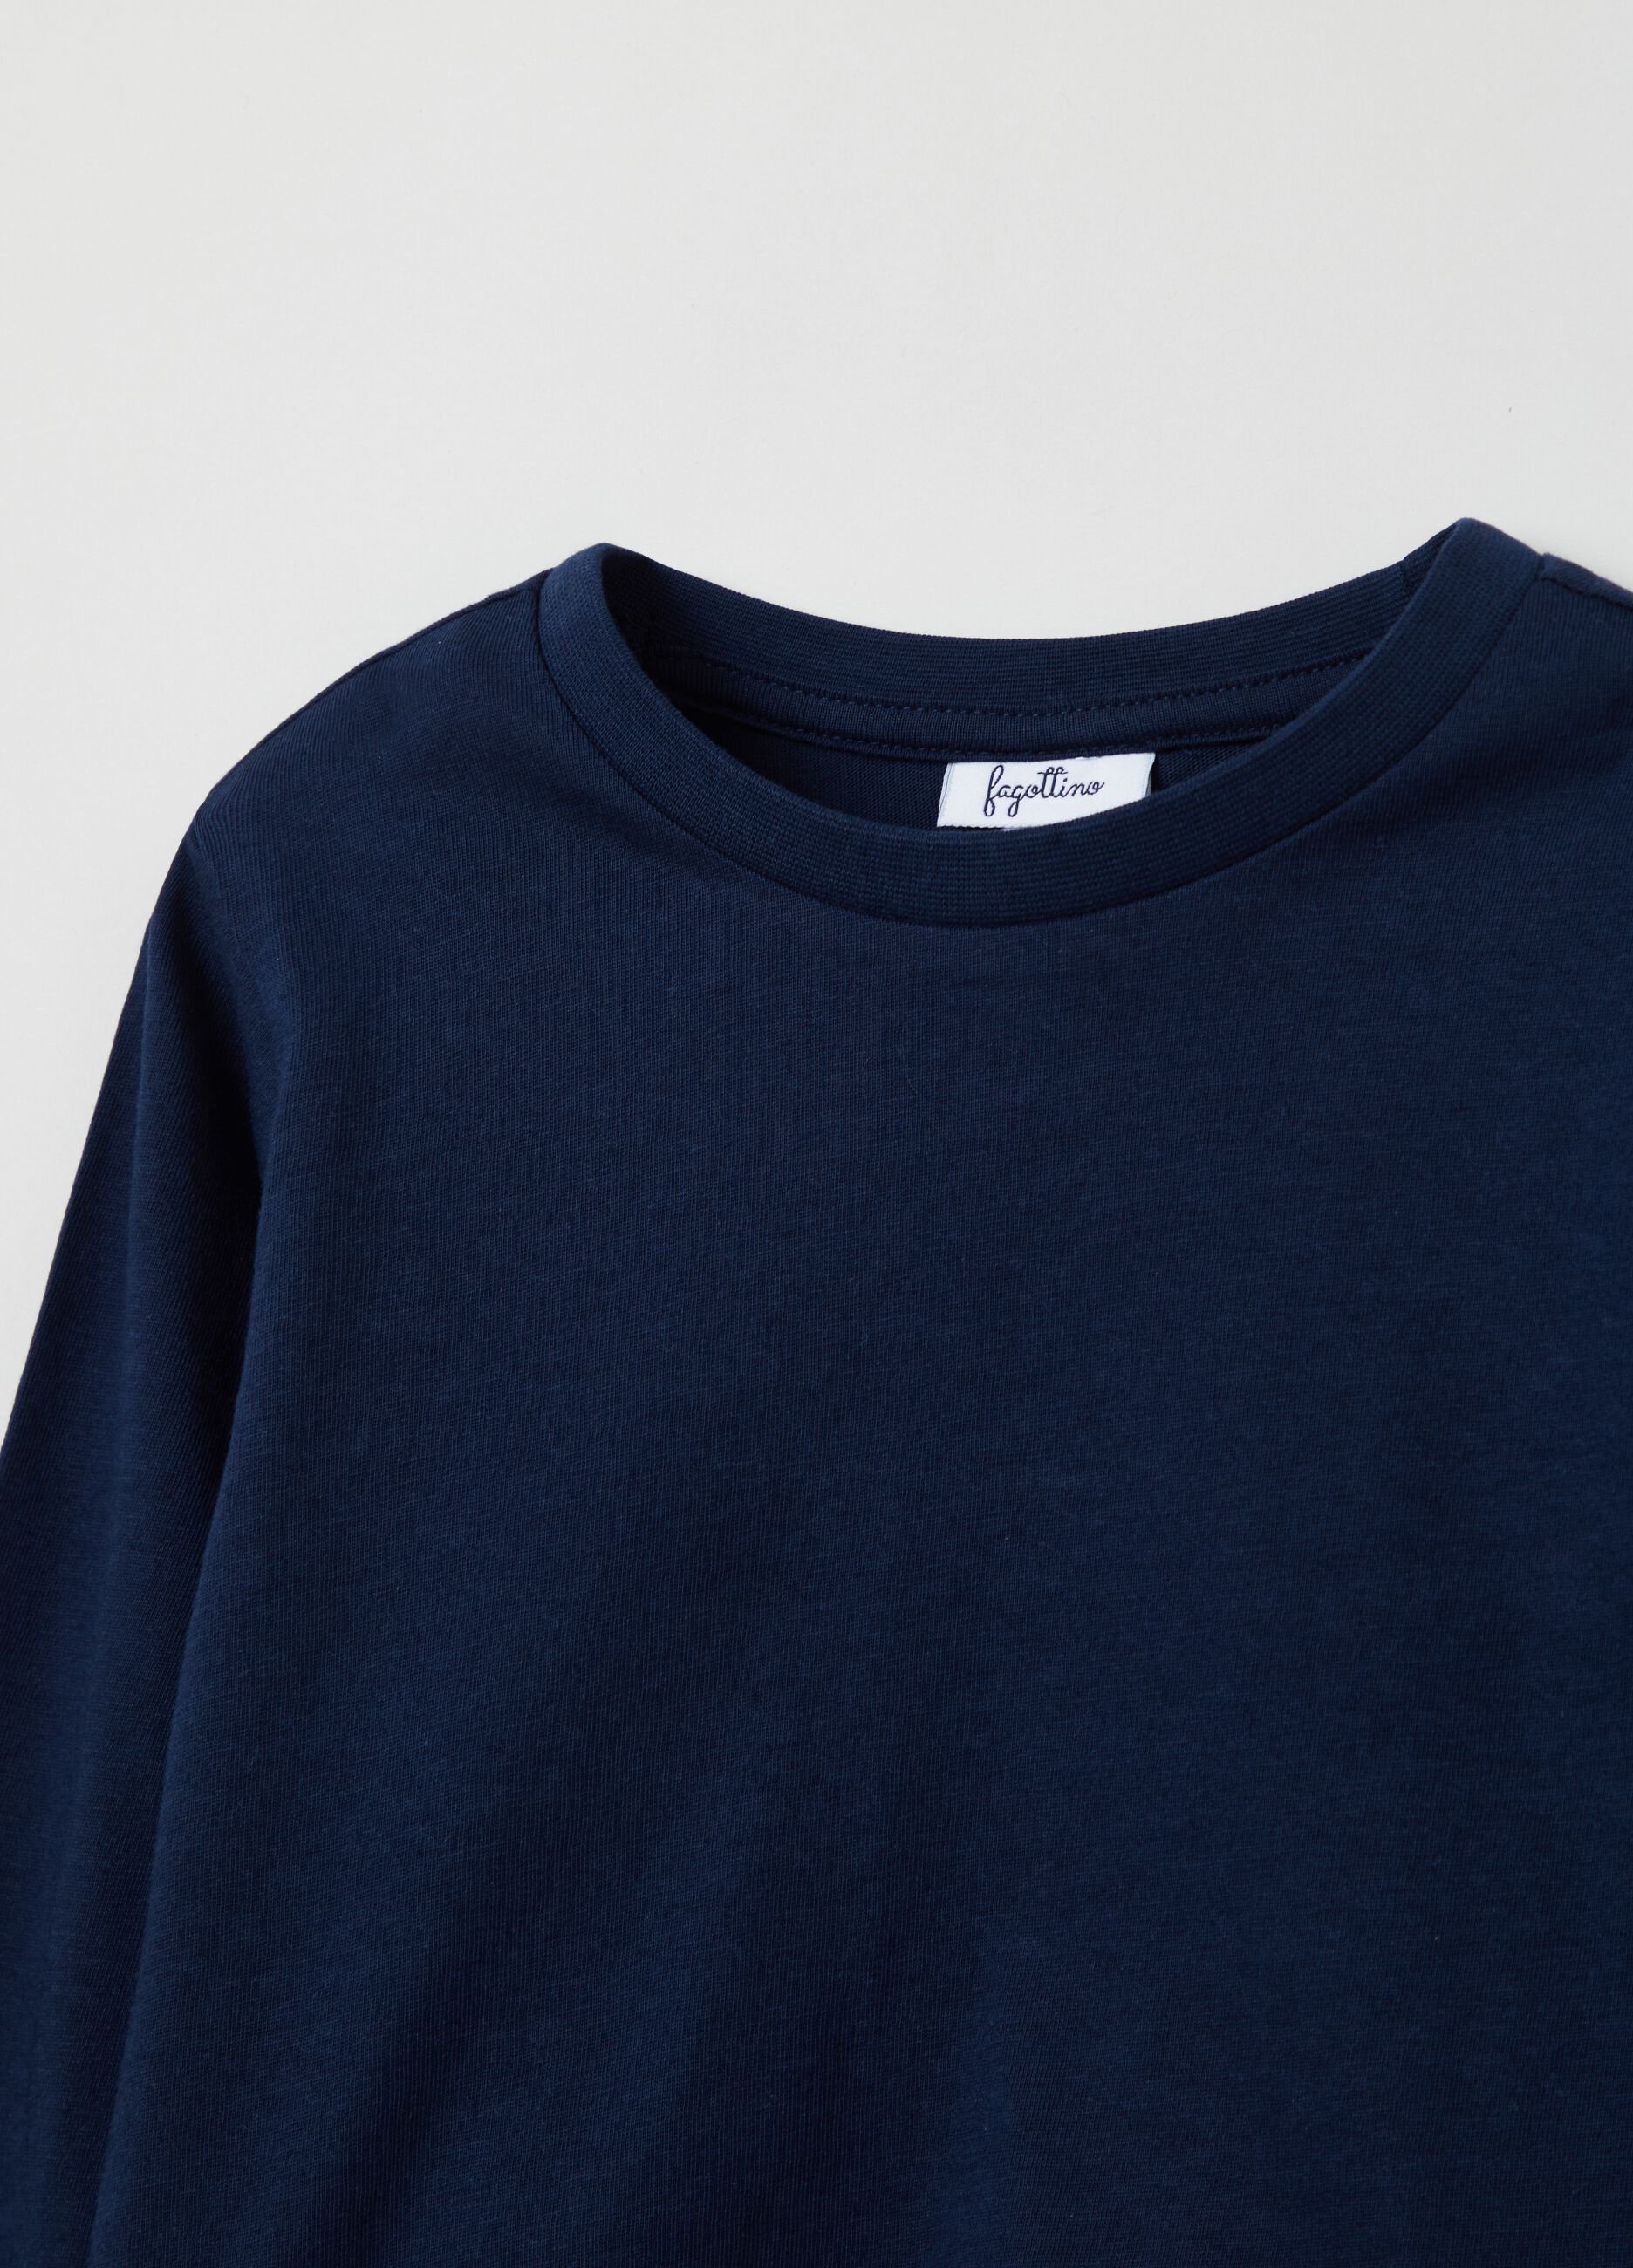 Long-sleeved T-shirt in cotton_2